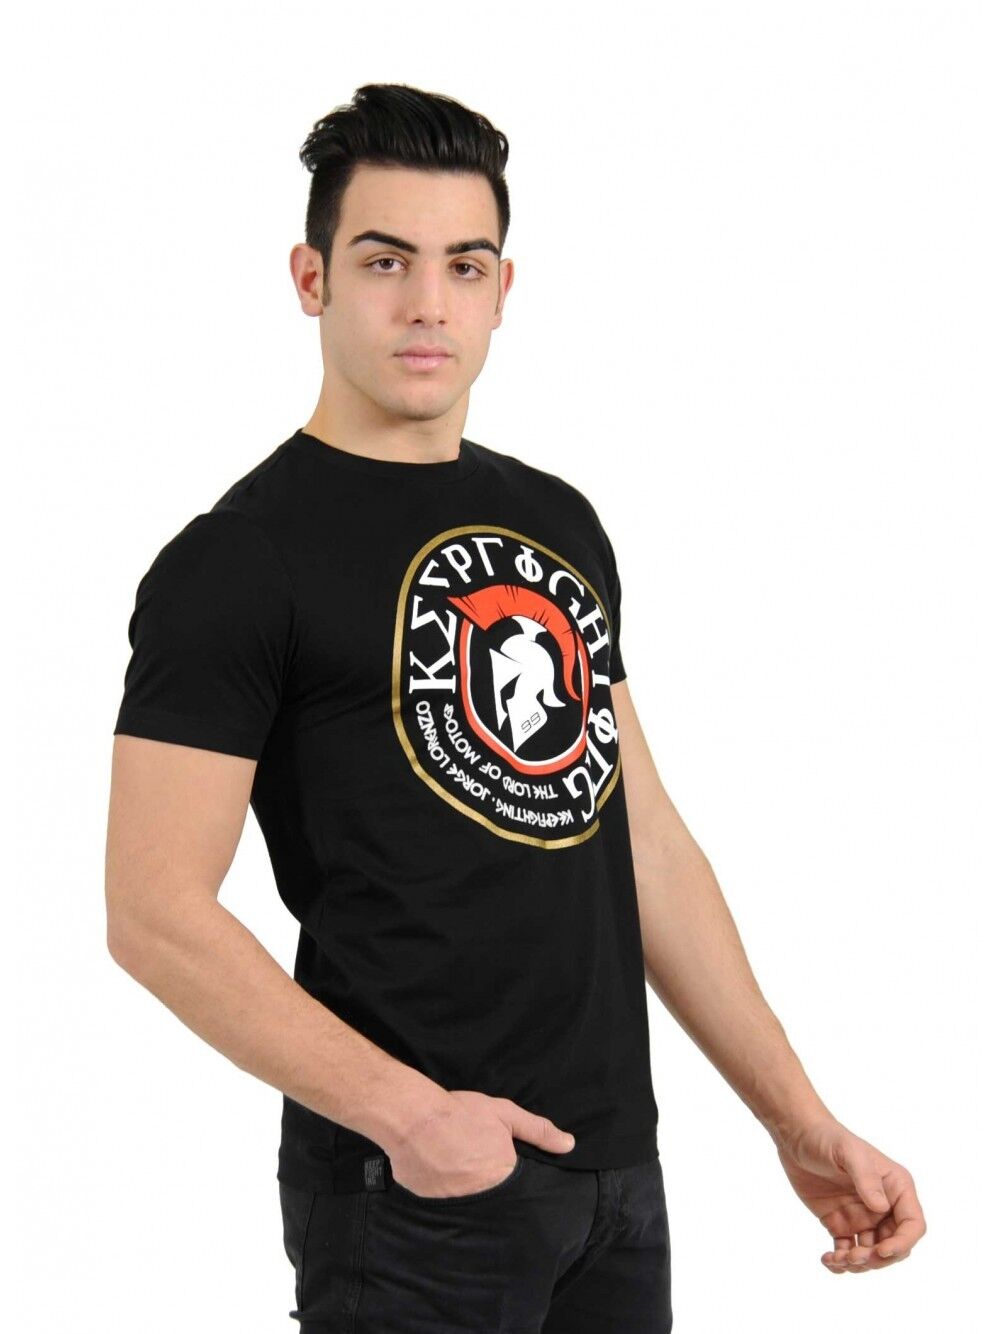 New Official Jorge Lorezno Spartan "Keep Fighting" T'Shirt - 16 31206